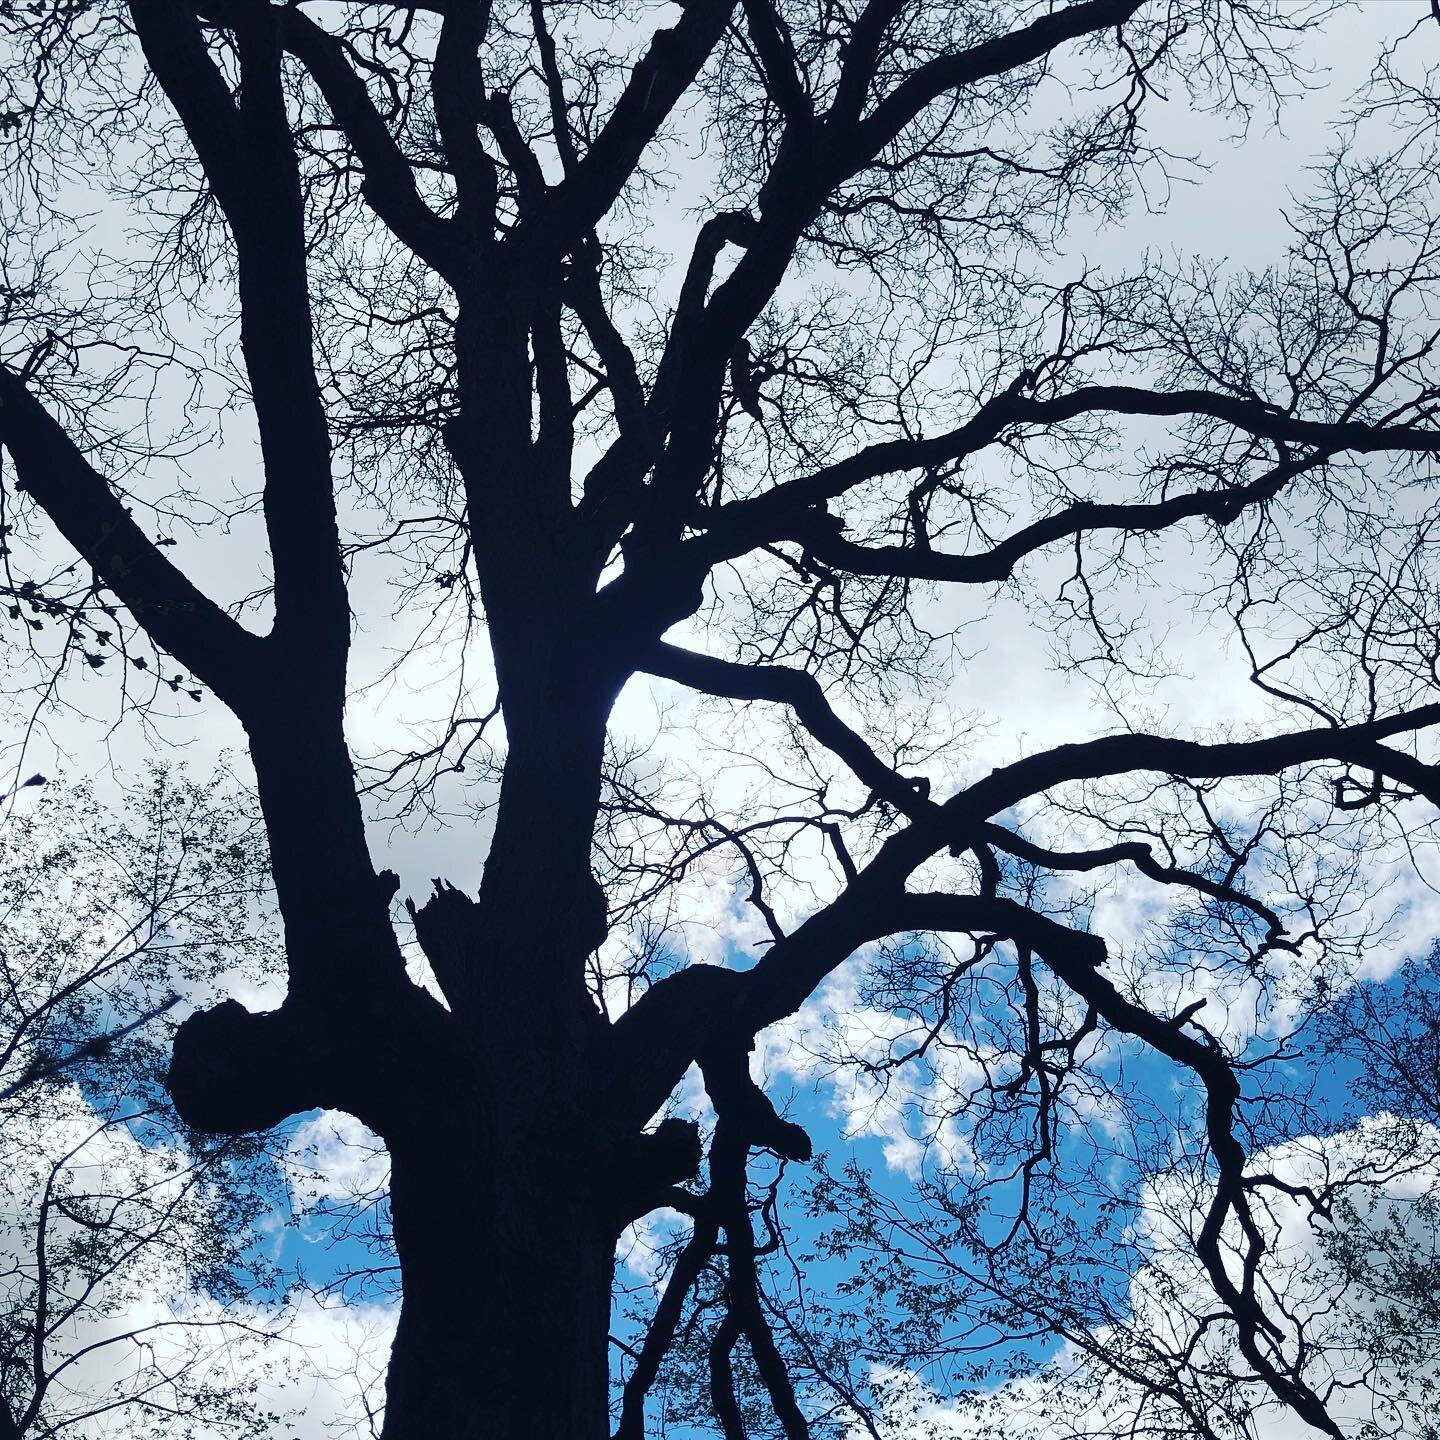 Friends: Remember to look up and take it all in! #lookup #purepresence #walkoutsidedaily #simplyorganizedlife